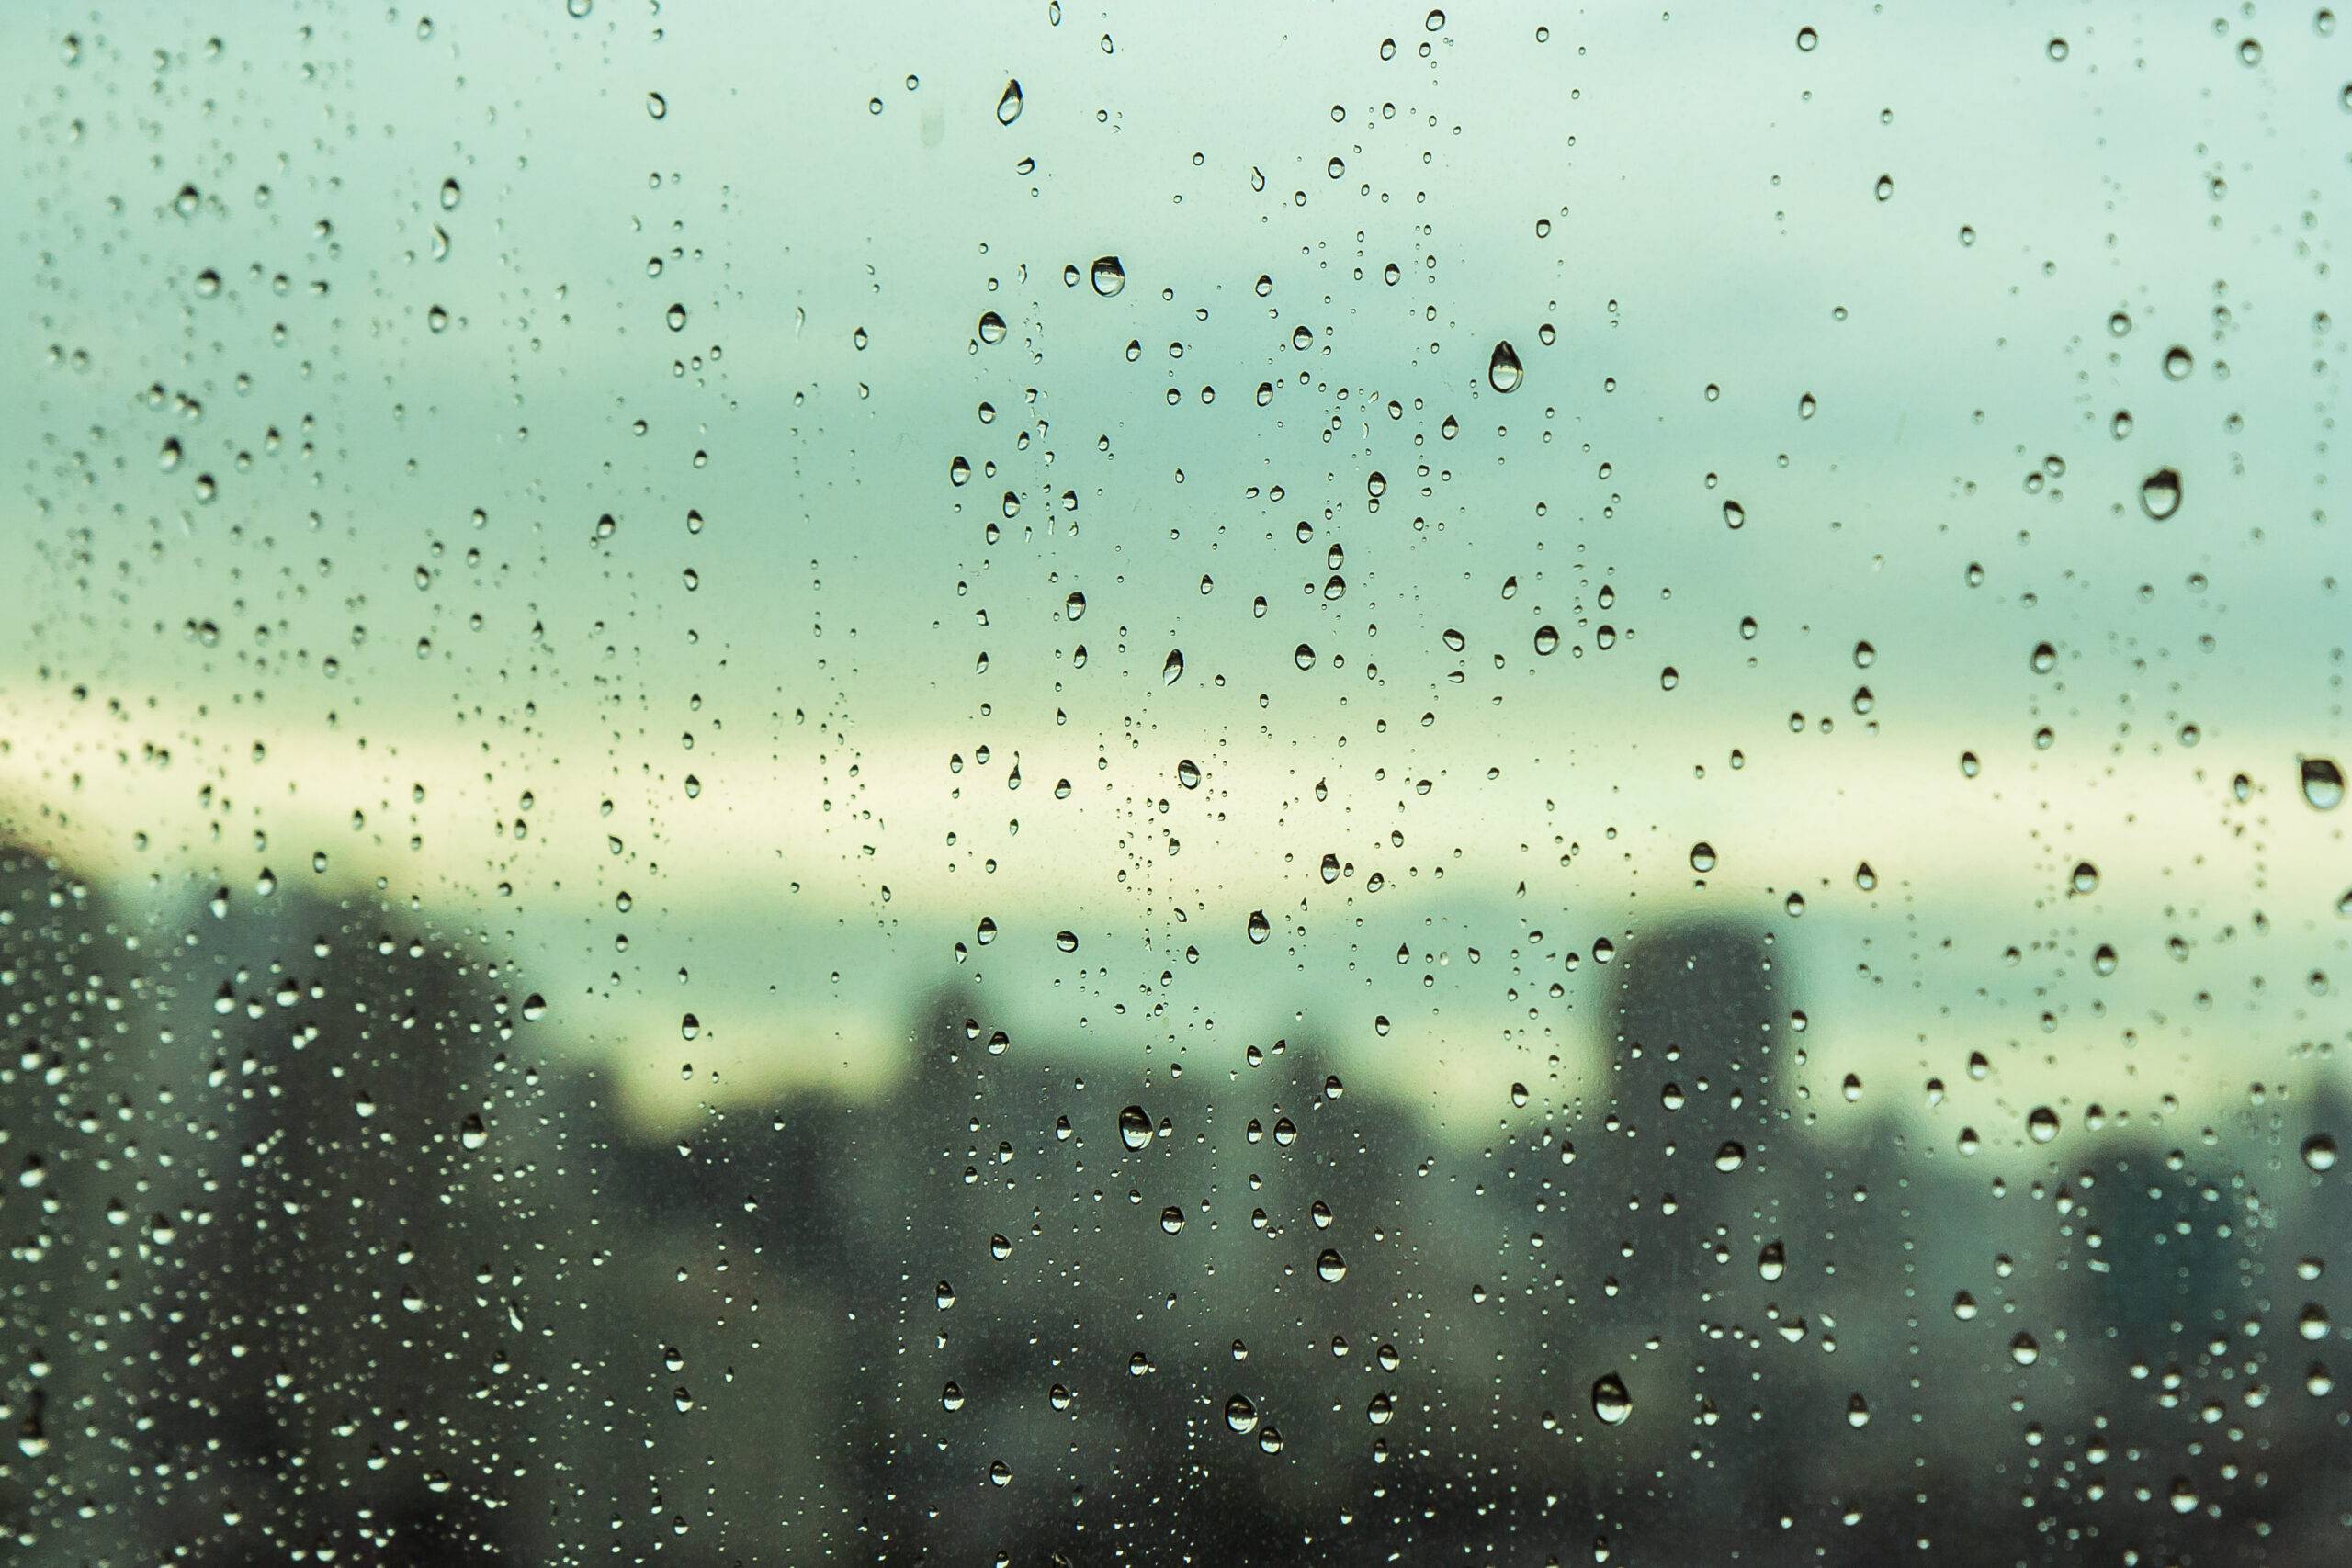 rain on the windows of an office town looking out onto a blurred city backdrop